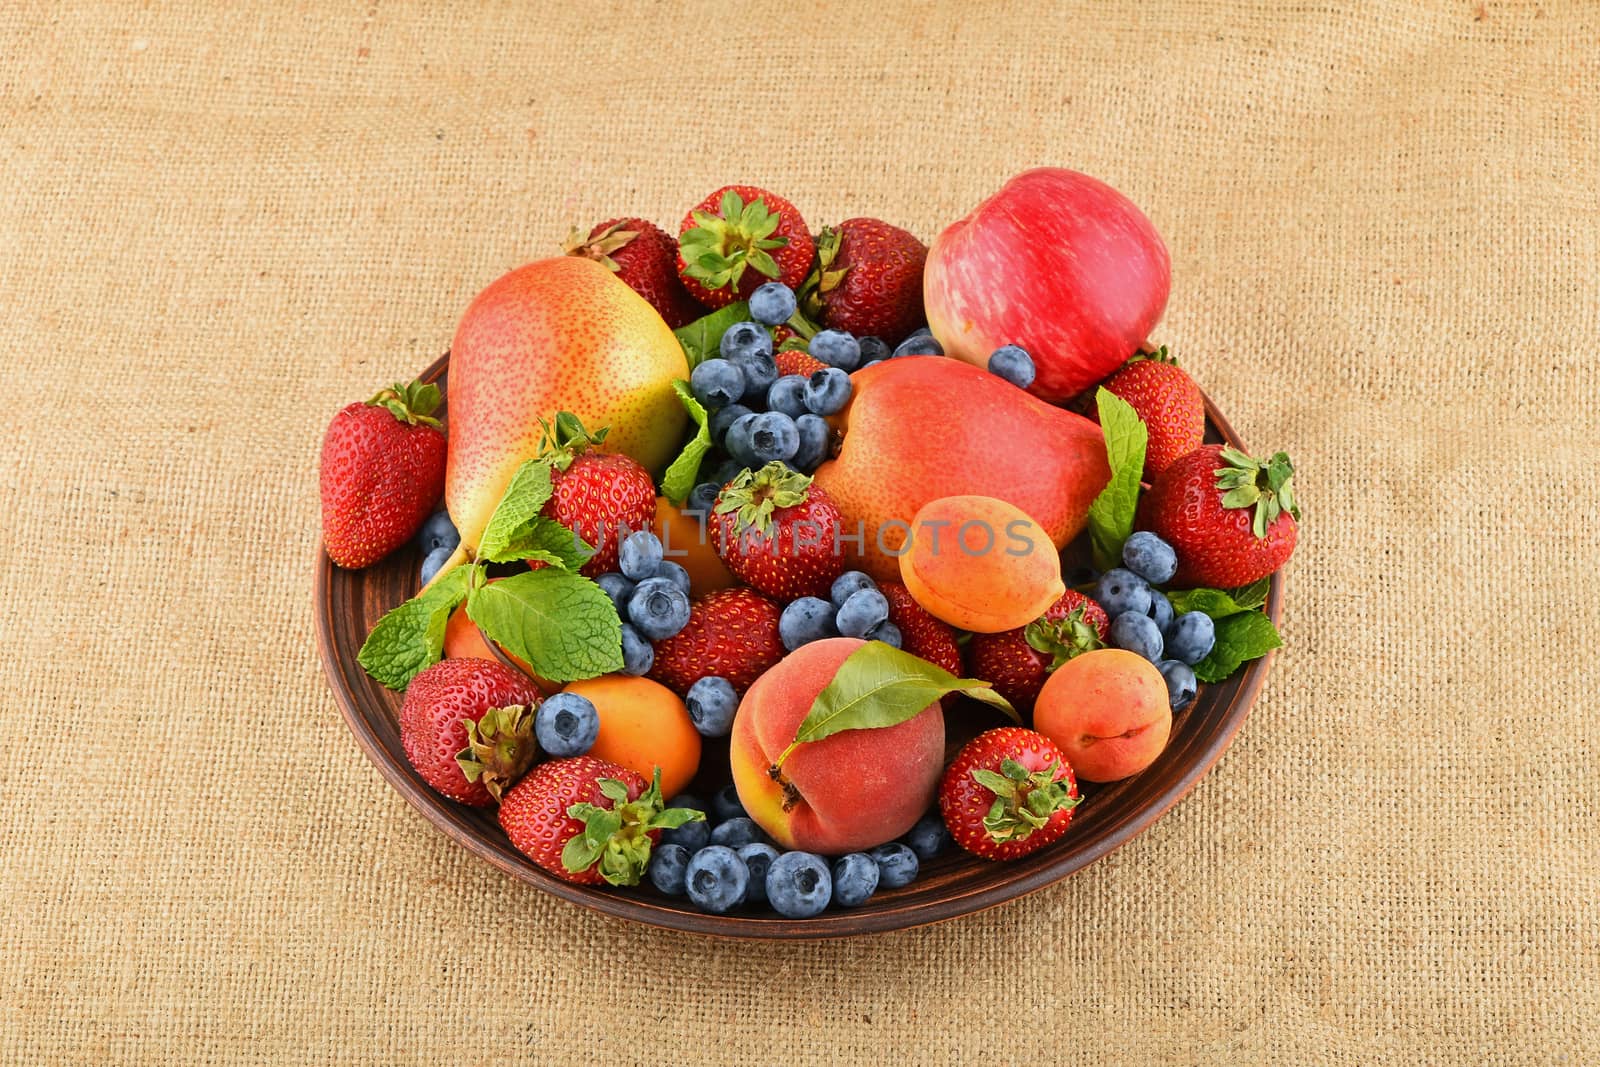 Fruits and berries mix in ceramic plate on burlap canvas by BreakingTheWalls